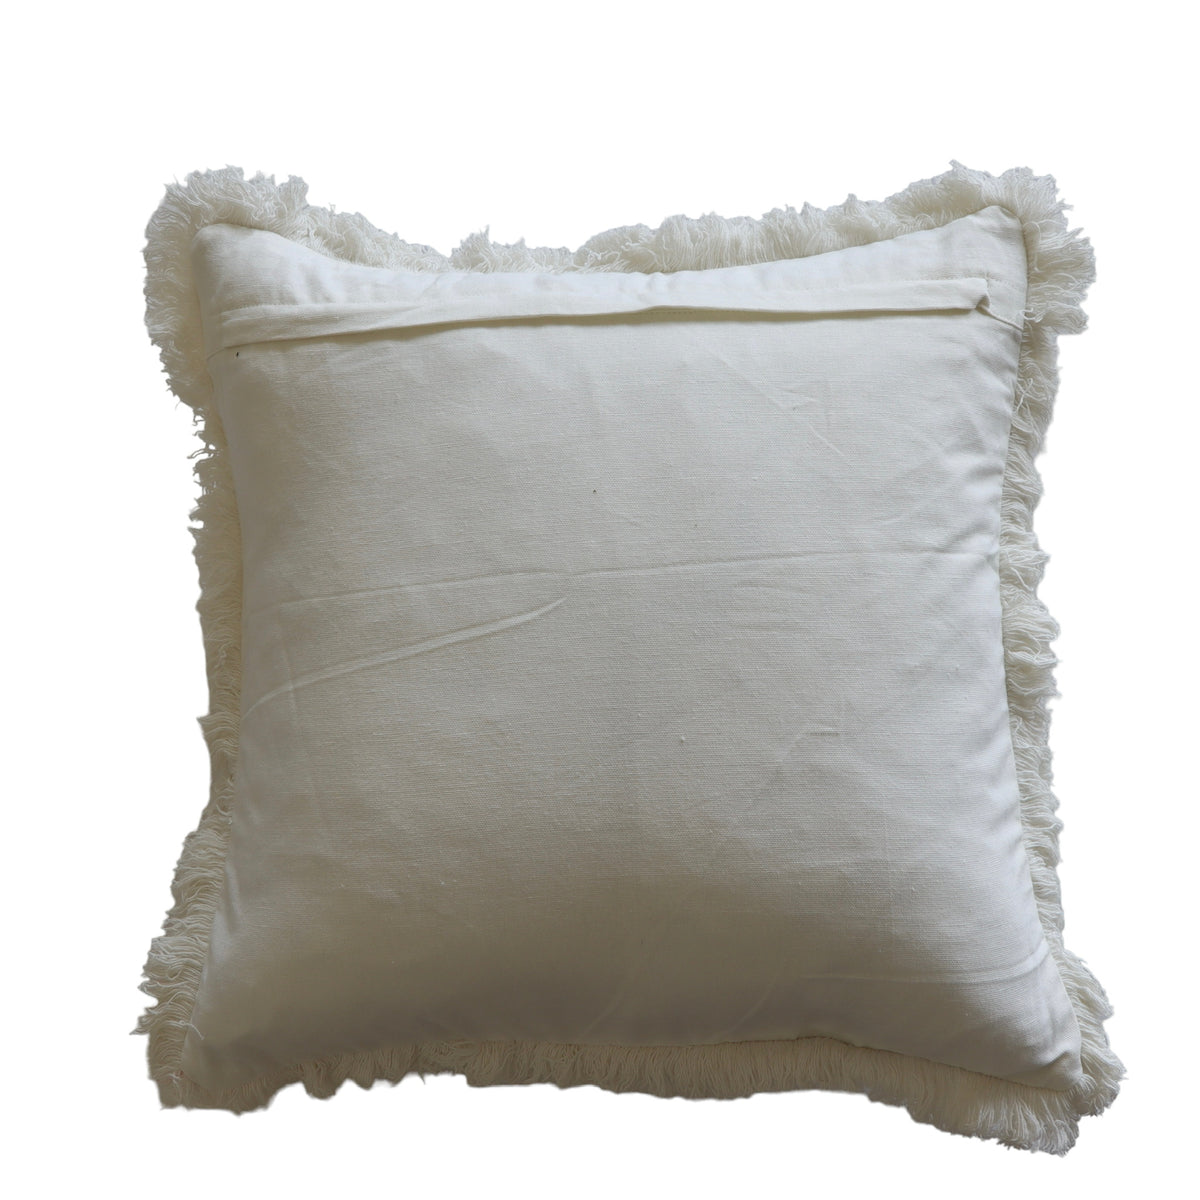 Zachary Oat Textured Woven Pillow Cover - 18 Inch - Holistic Habitat 